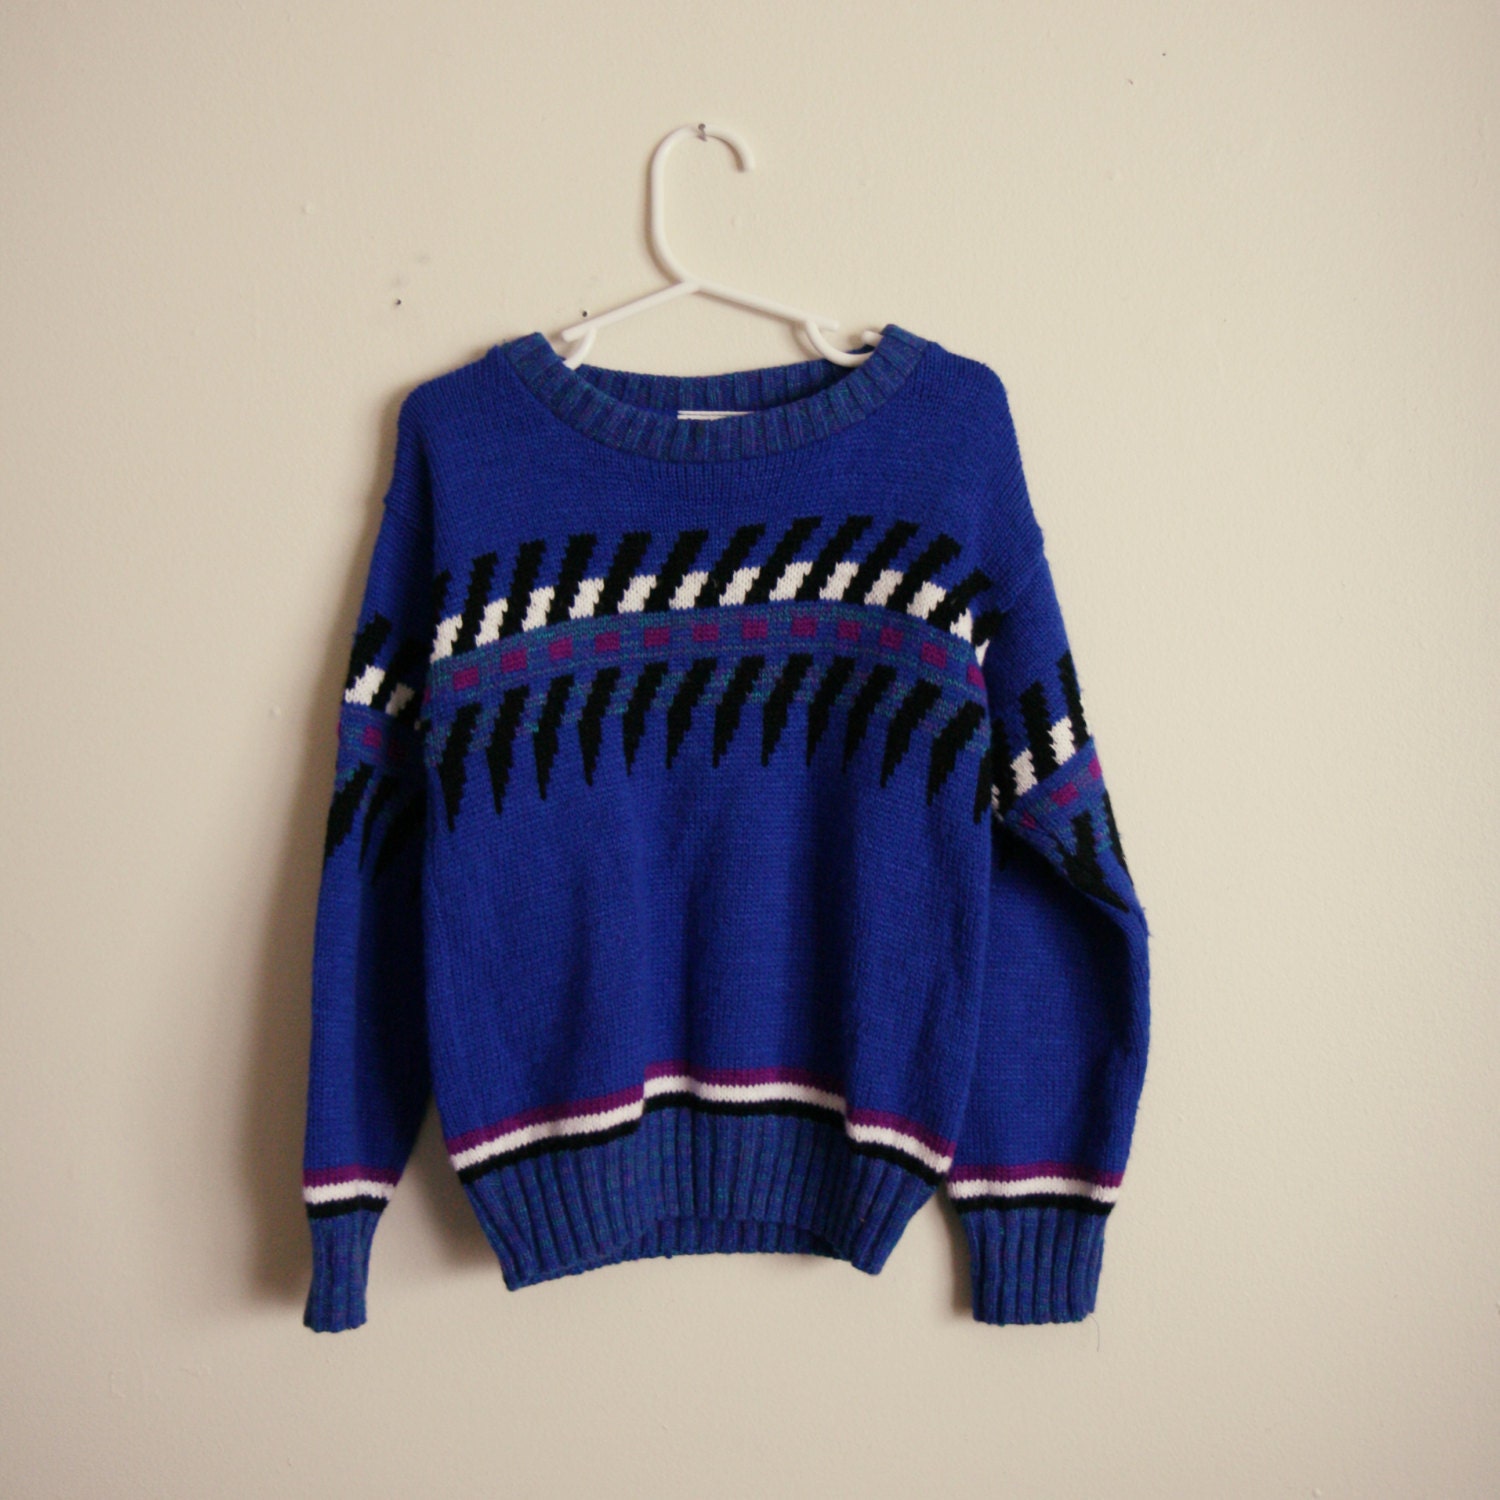 vintage 80s kids KITSCHY patterned sweater / by ohopheliashop